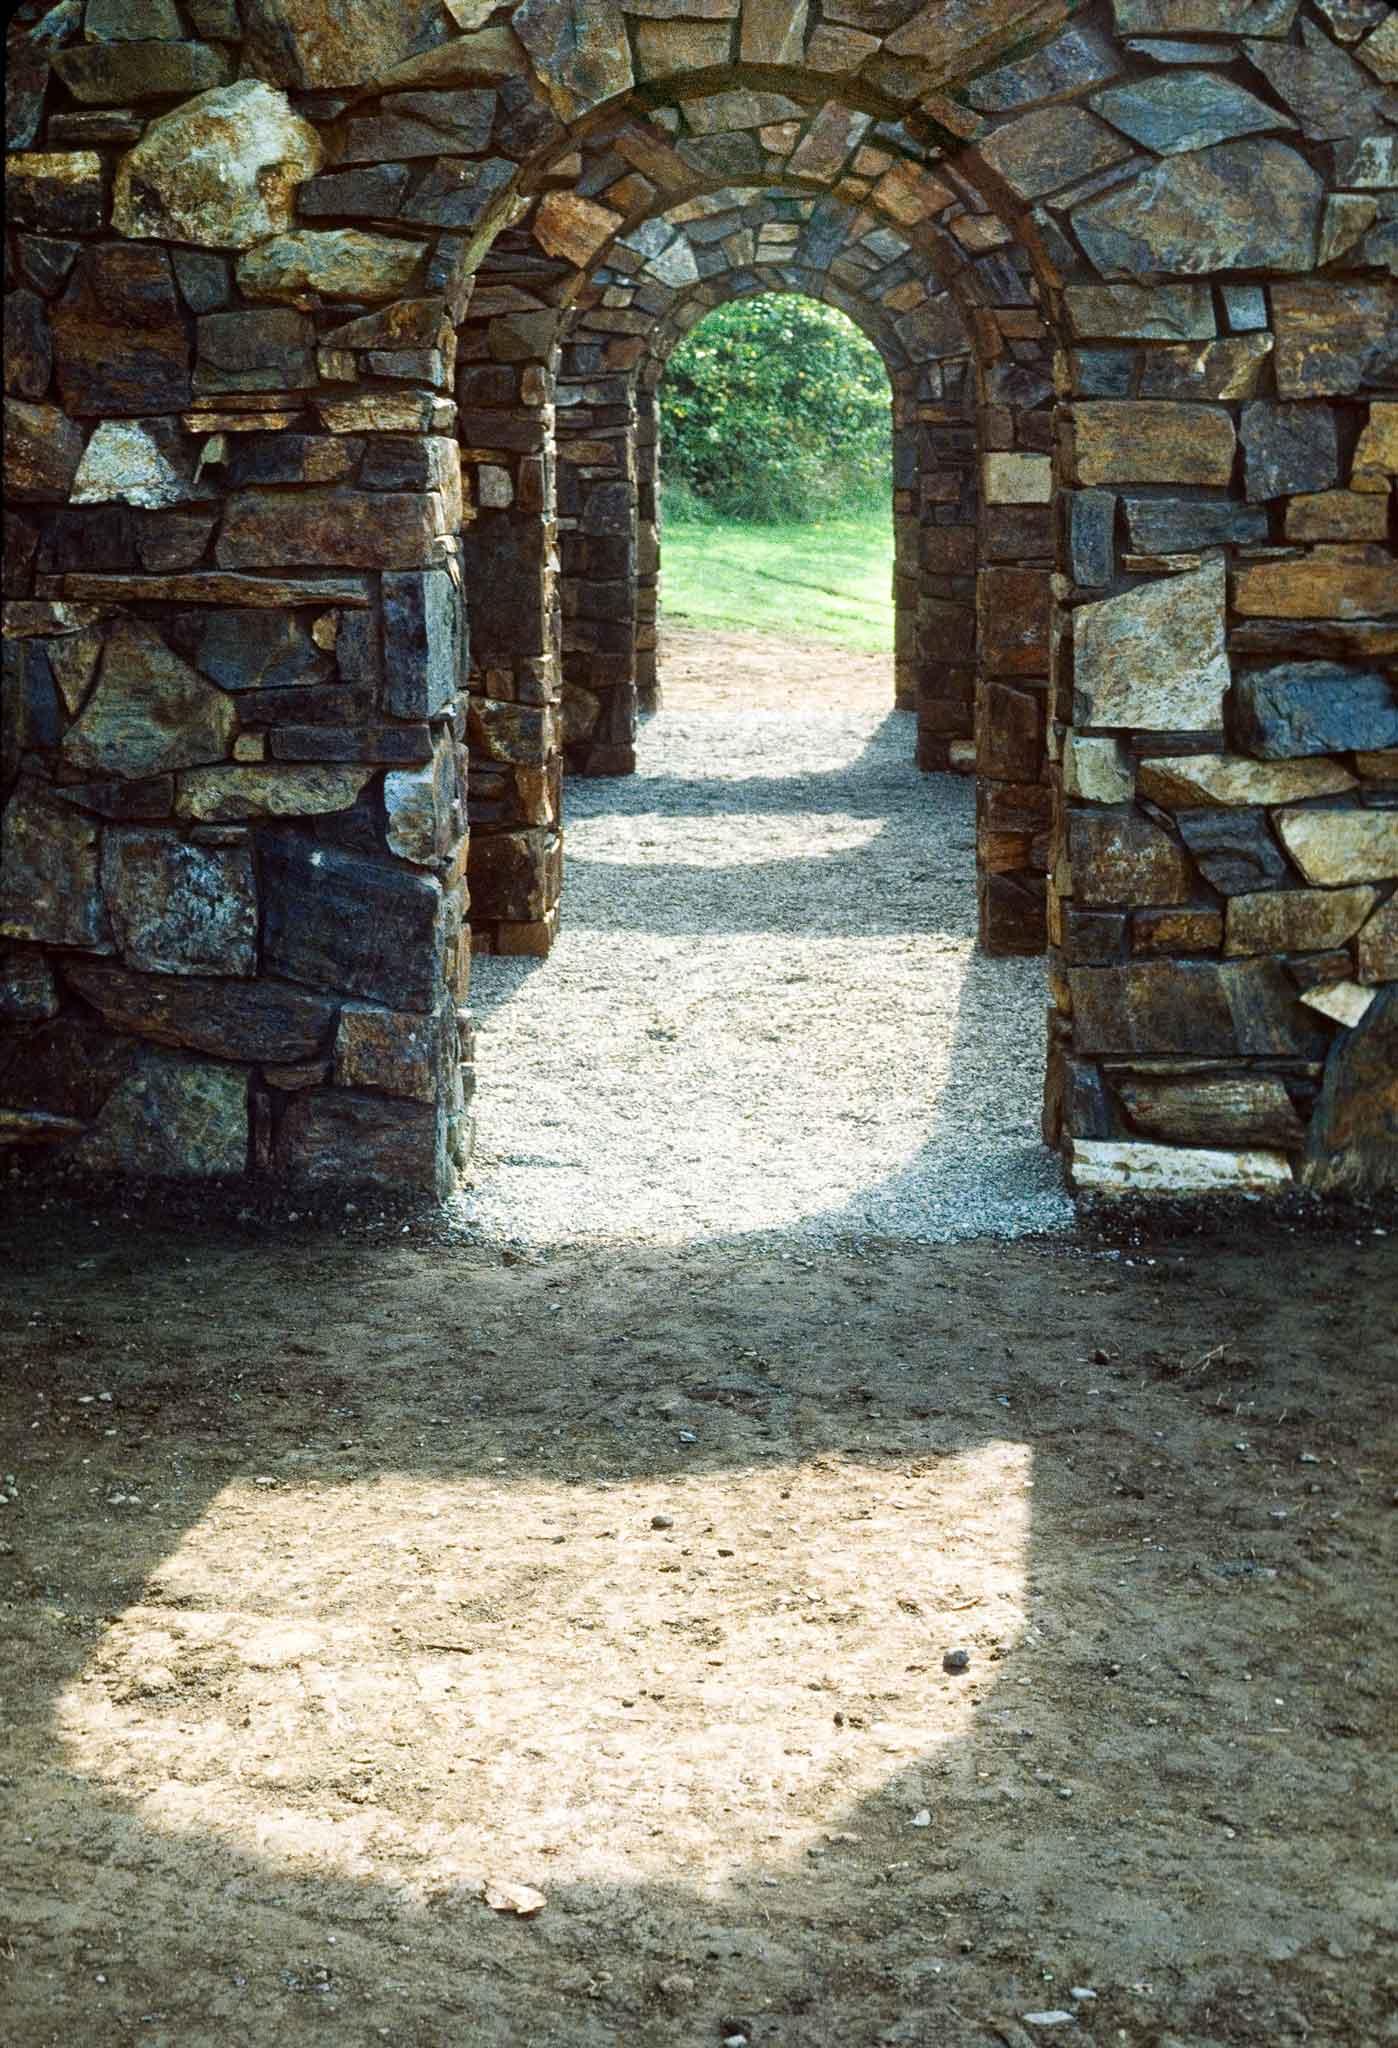 Concentric archways in stone walls